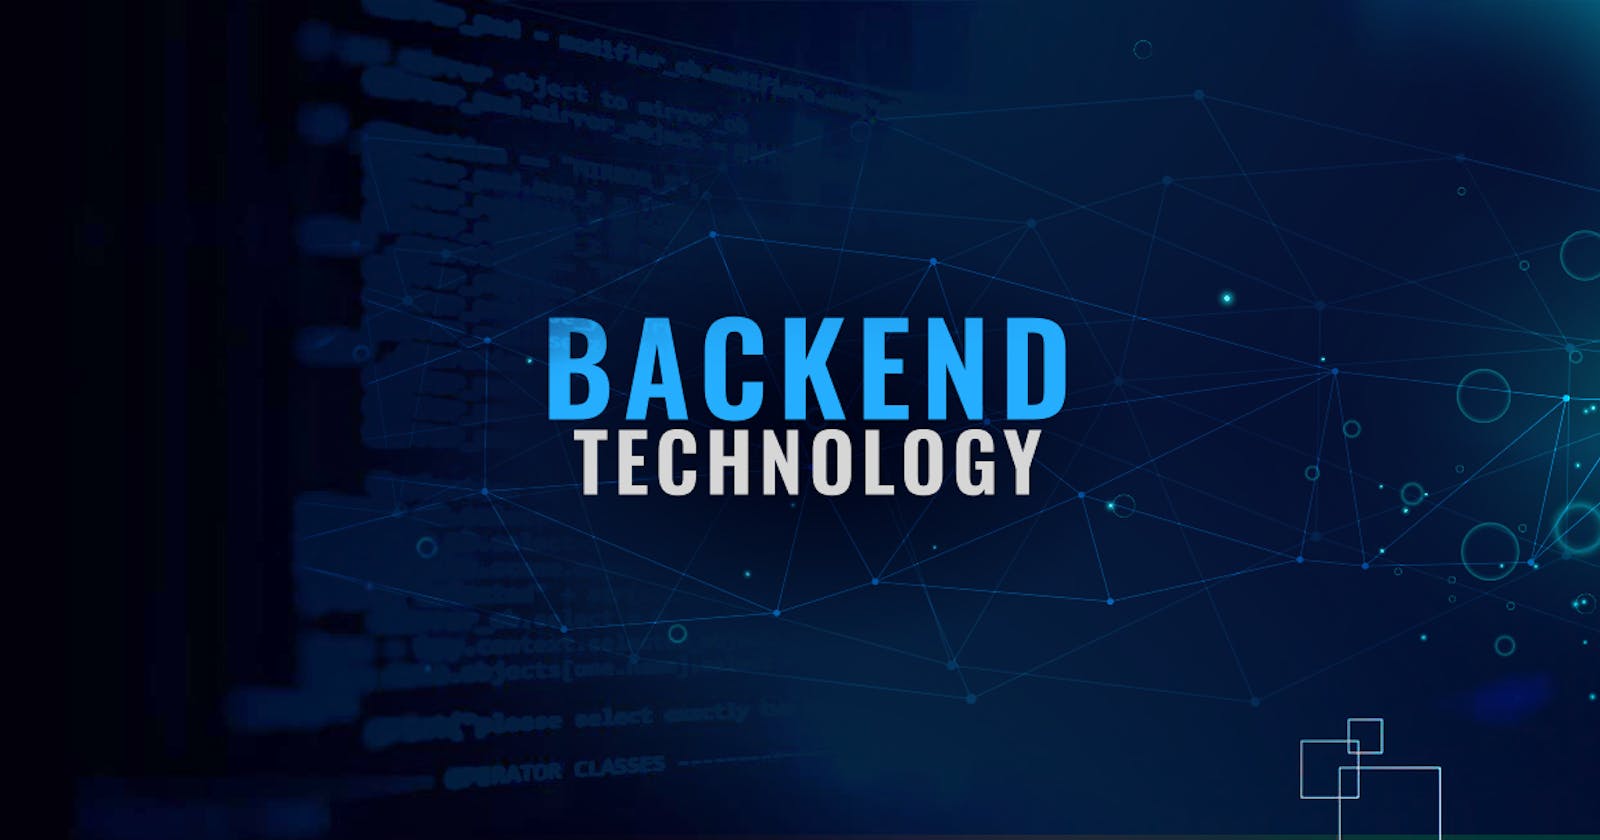 Things you need to take into consideration when building a backend software